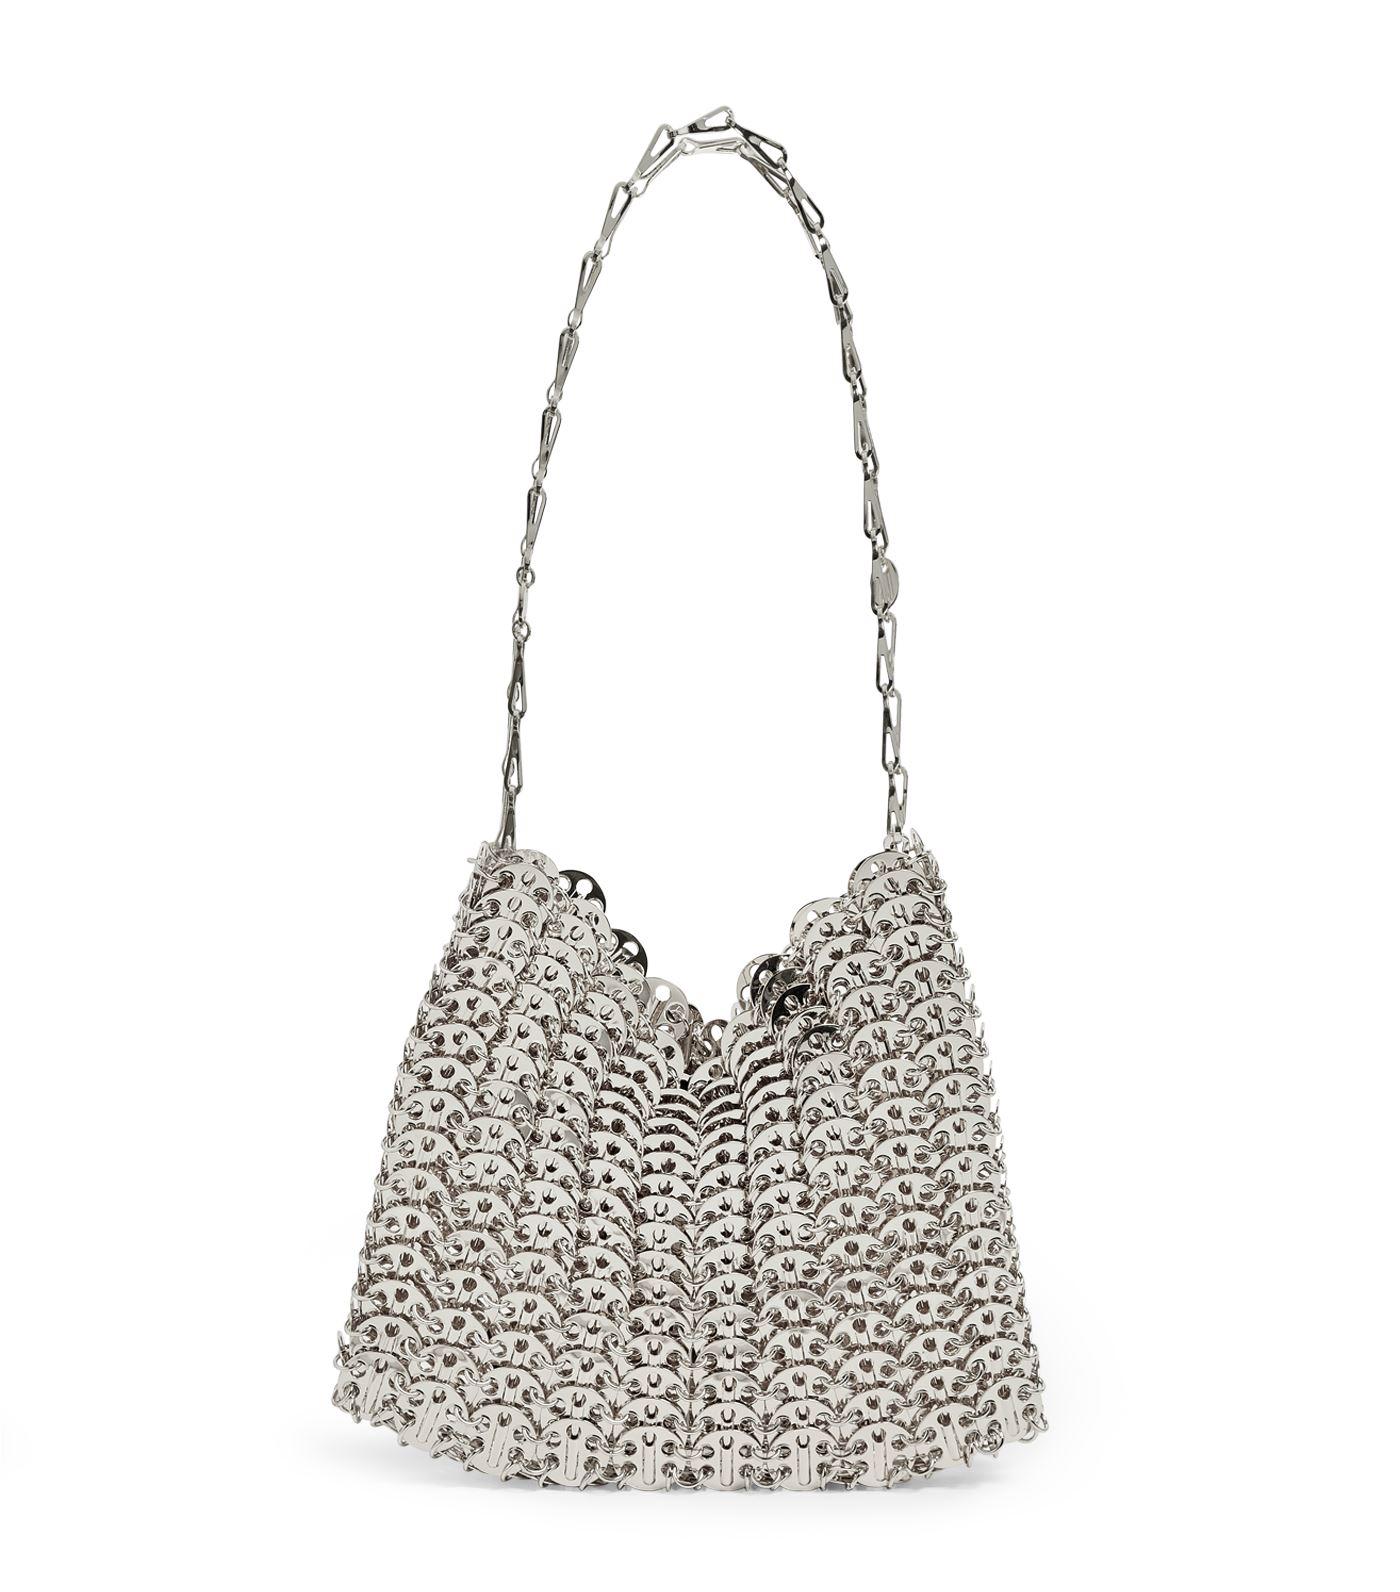 Paco Rabanne 1969 Chainmail Bag in Silver (Metallic) - Lyst